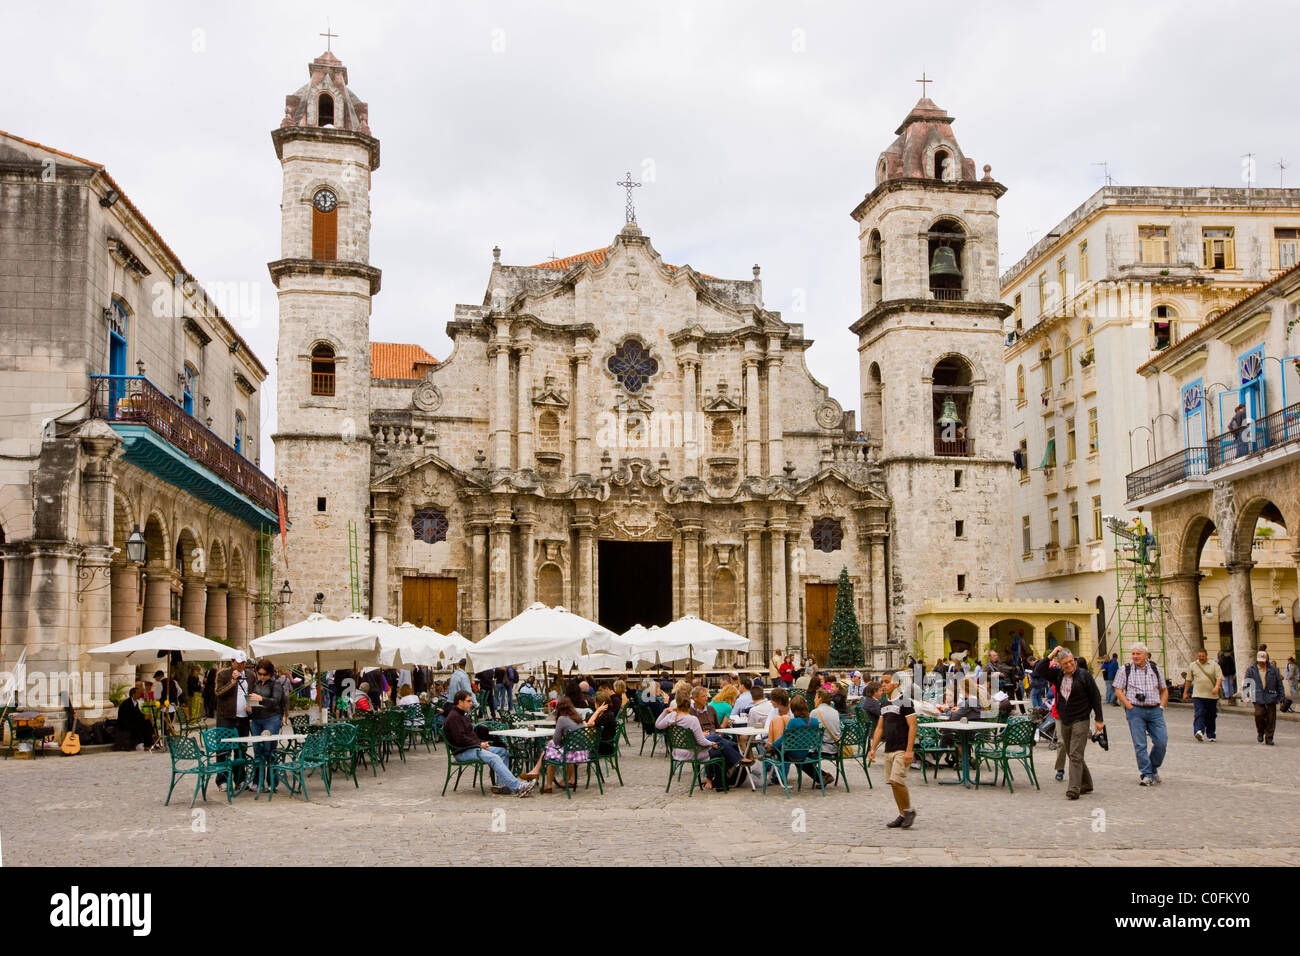 People eating an drinking in the Cathedral square Havana Cuba Stock Photo